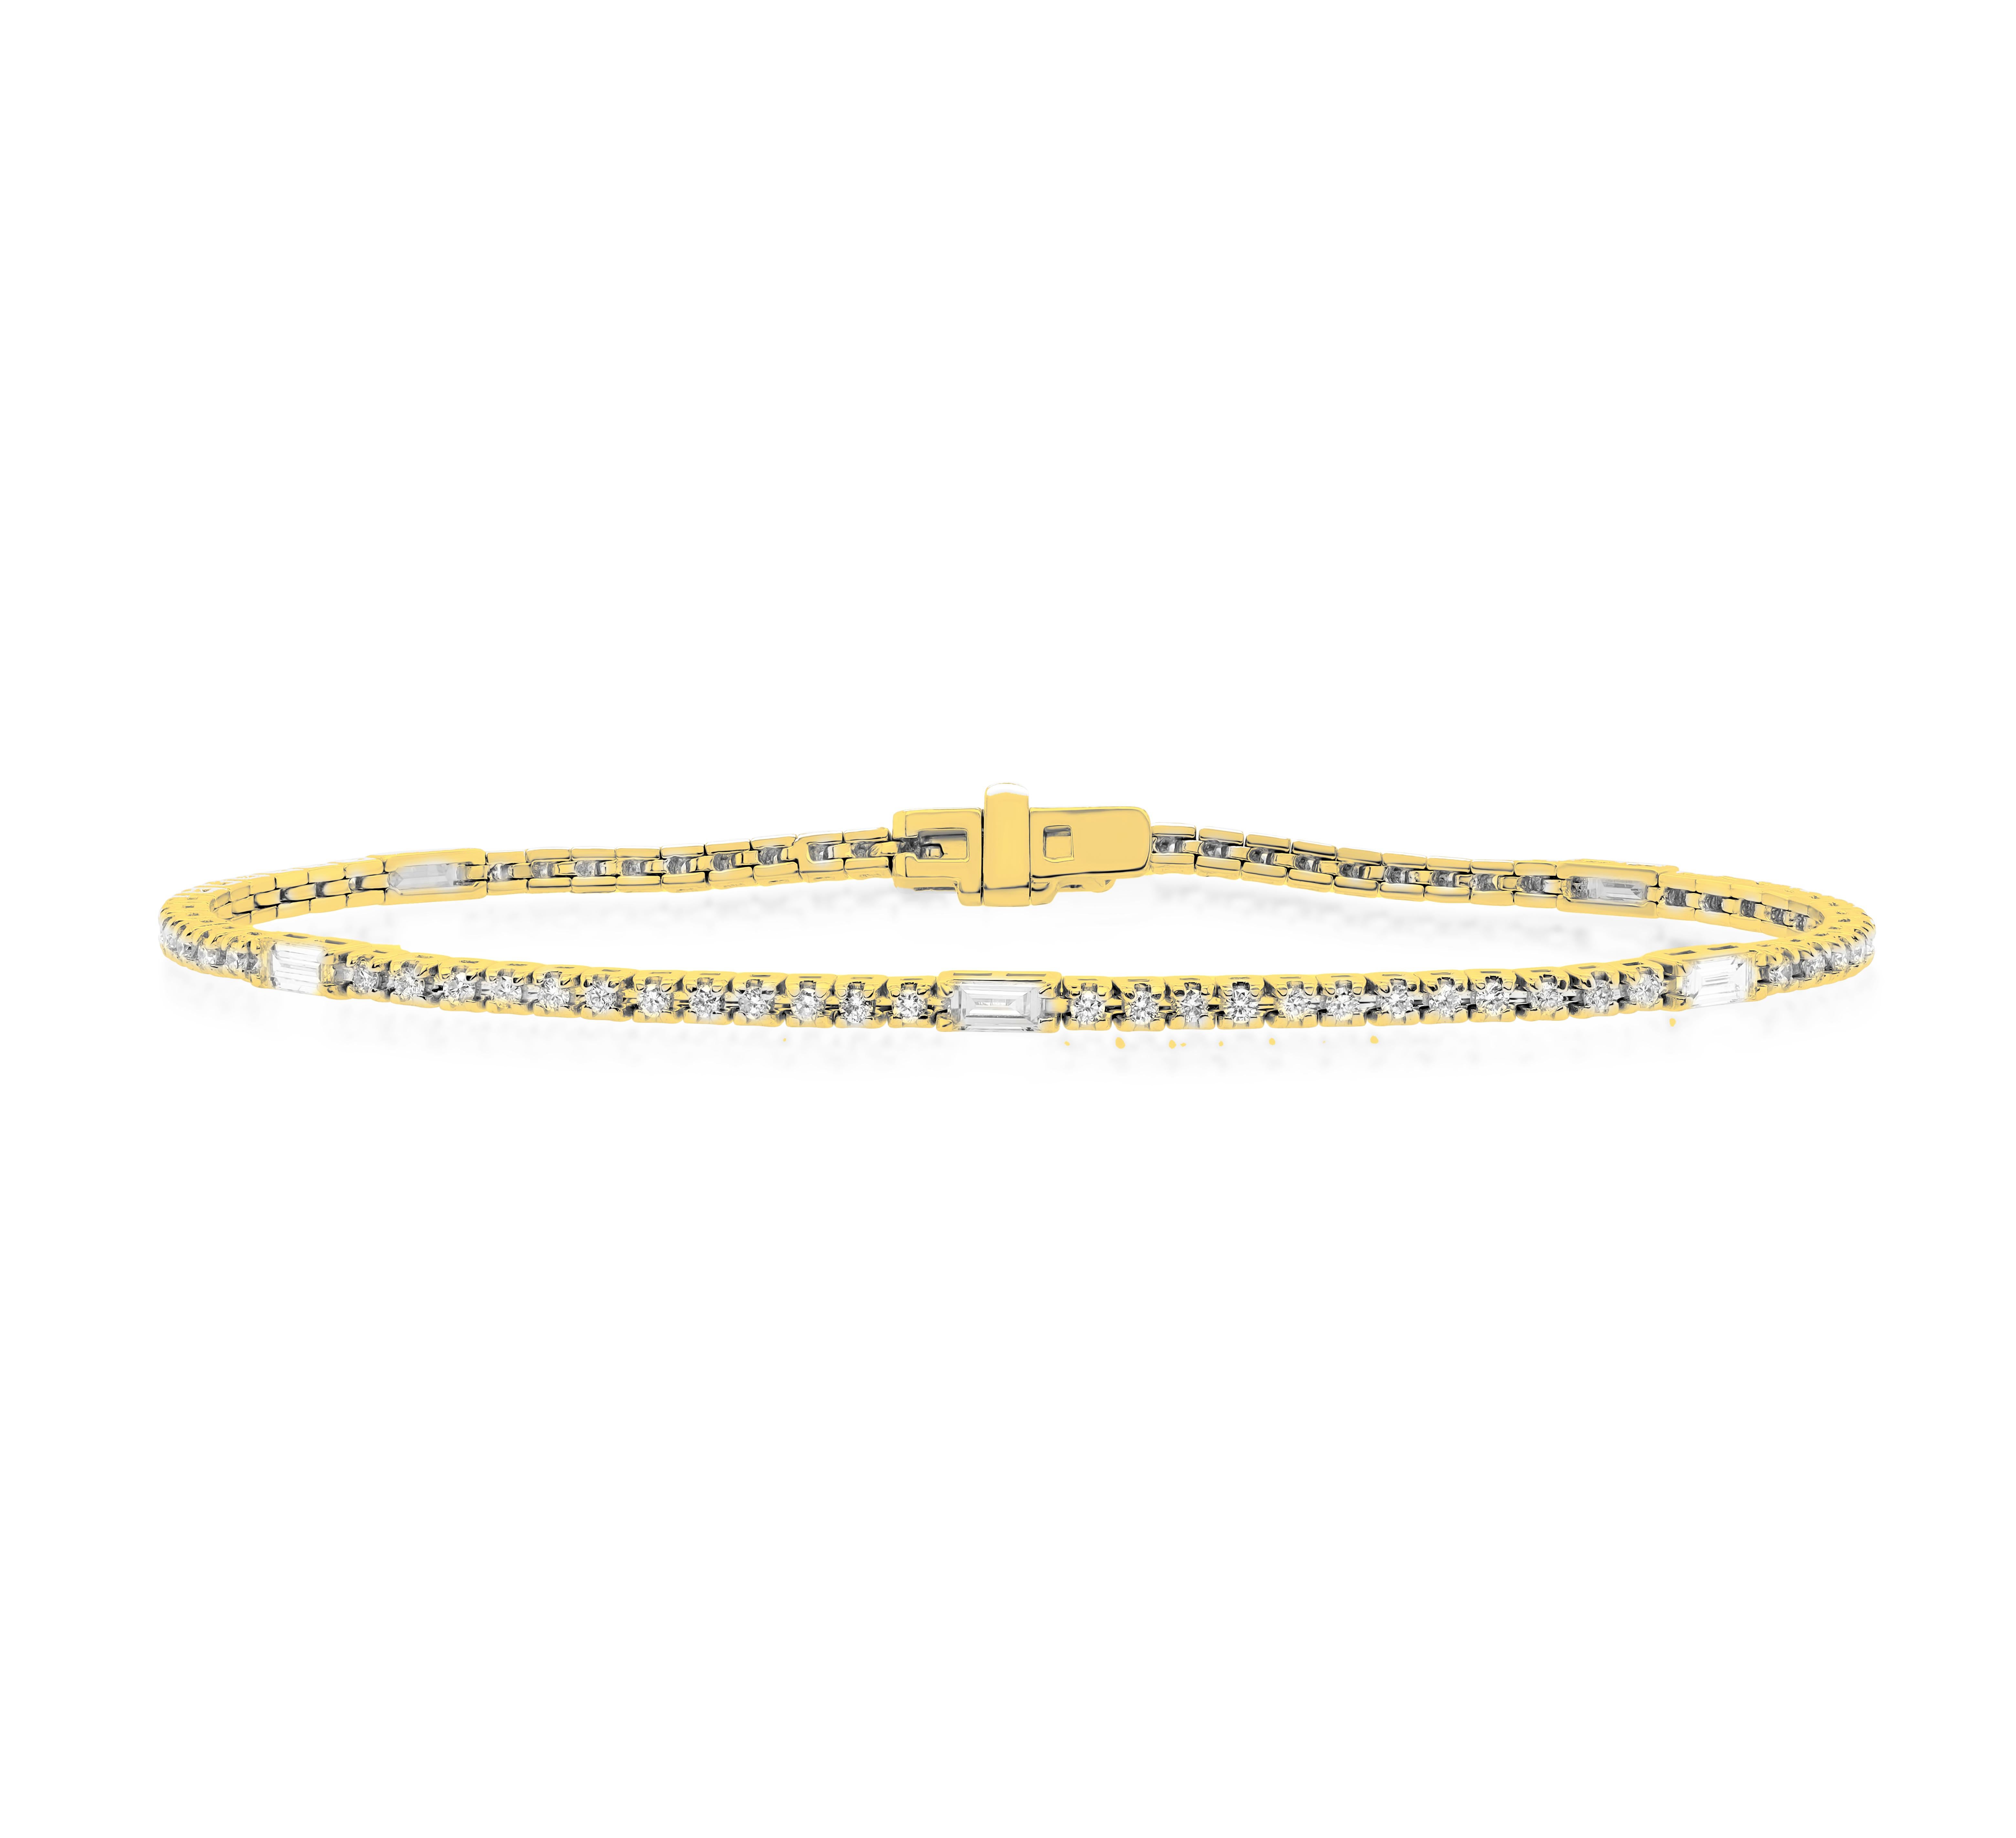 Custom 14kt yellow gold bracelet with 2 cts of rounds and baguette diamonds color FG SI clarity. Excellent Cut.